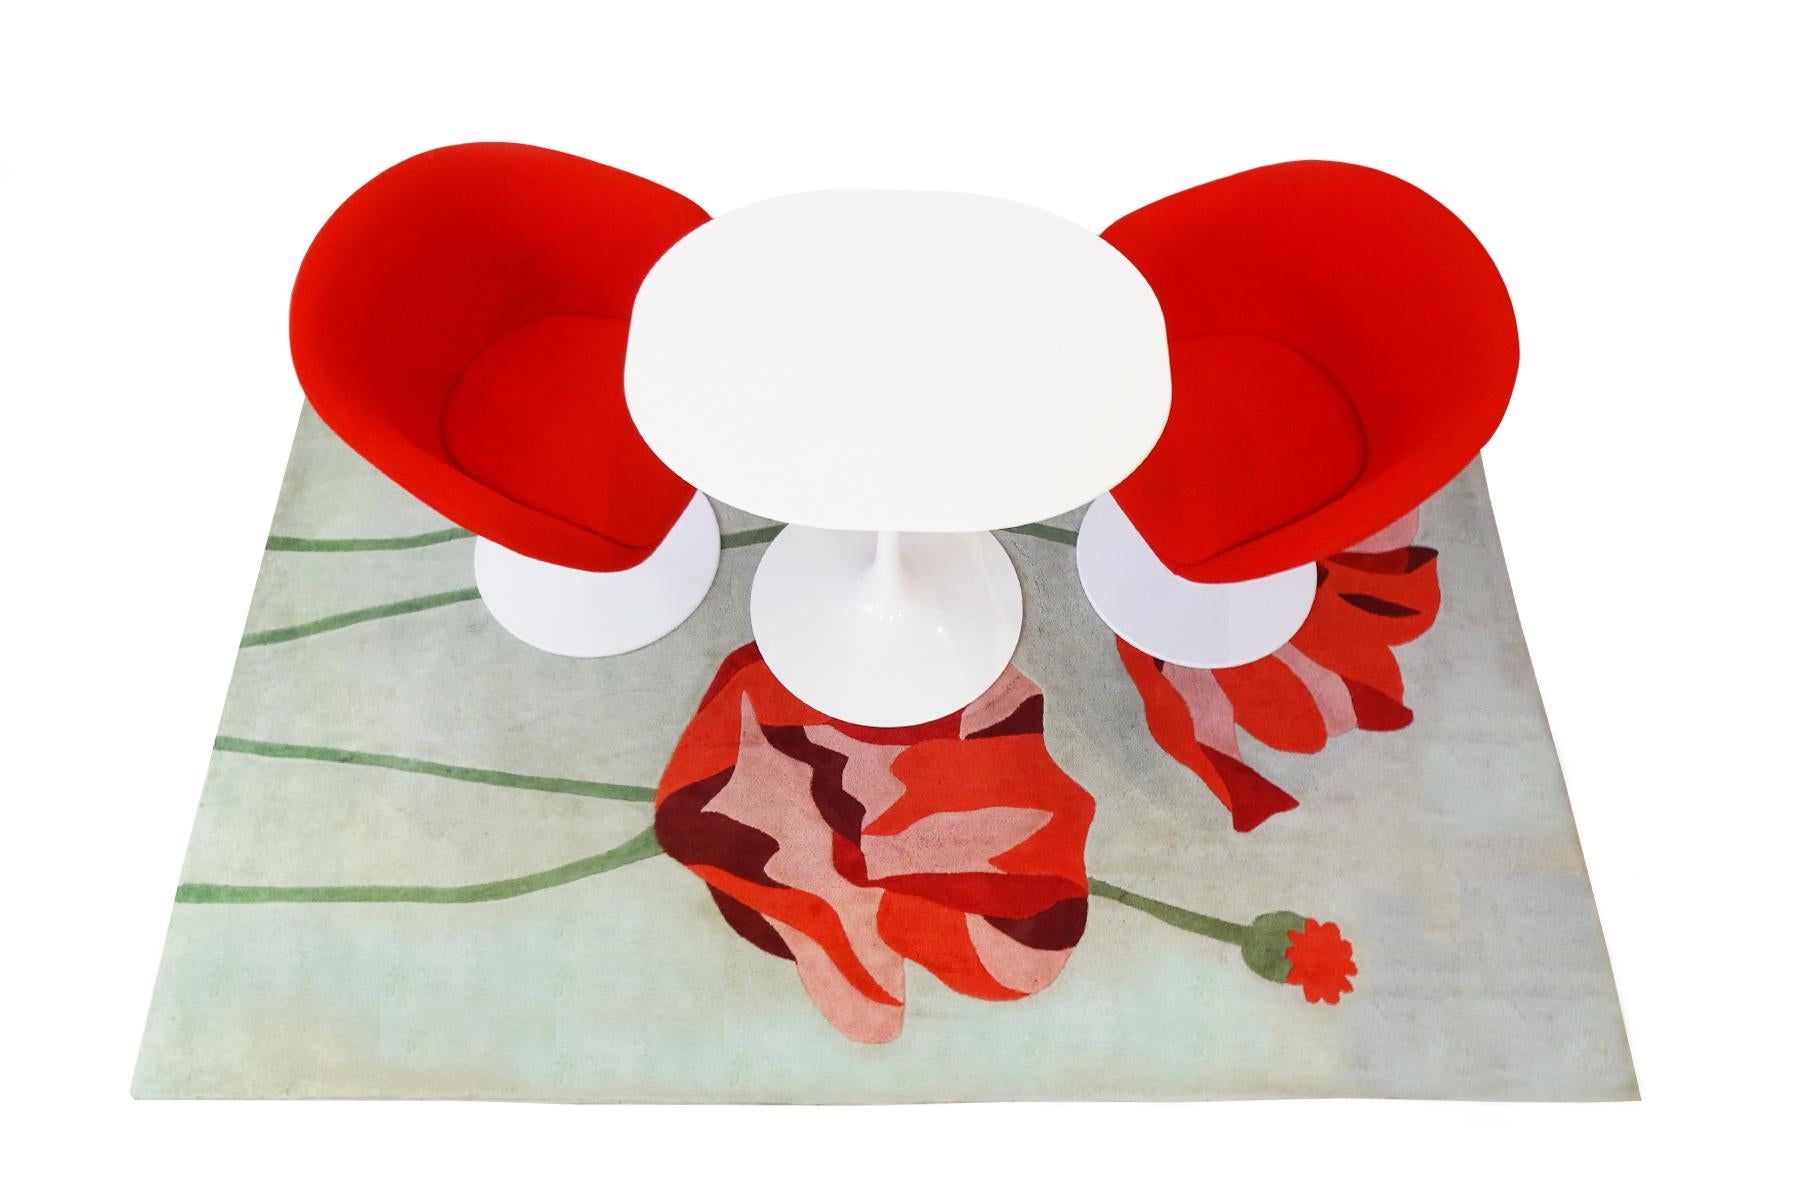 Eero Saarinen Knoll Studio table ‘breakfast’ set comprising side table, chairs and rug

A classic pre-owned and cherished Knoll Studio Eero Saarinen small white breakfast table matched with two poppy red Arper swivel dining chairs and poppy